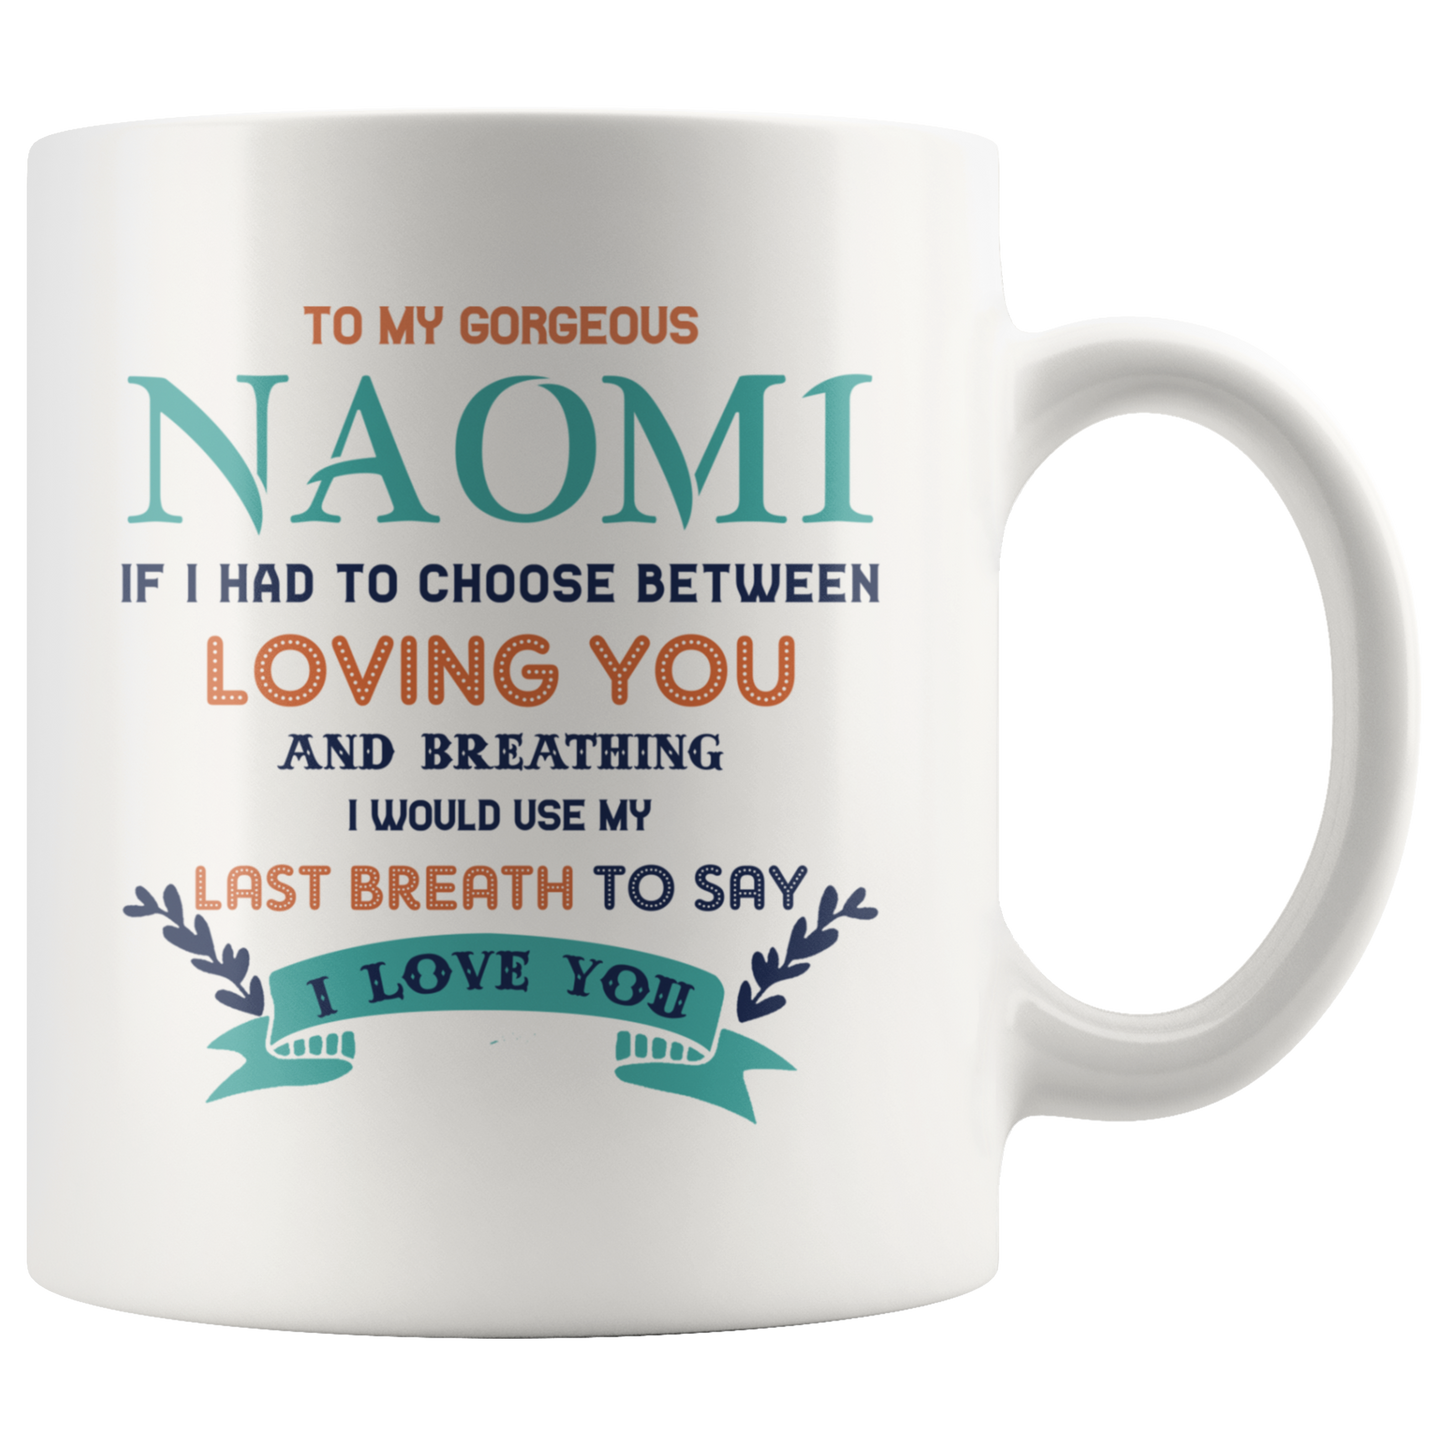 ND20393605-sp-19353 - Happy Christmas Gift For Wife From Husband Coffee Mug 11oz -